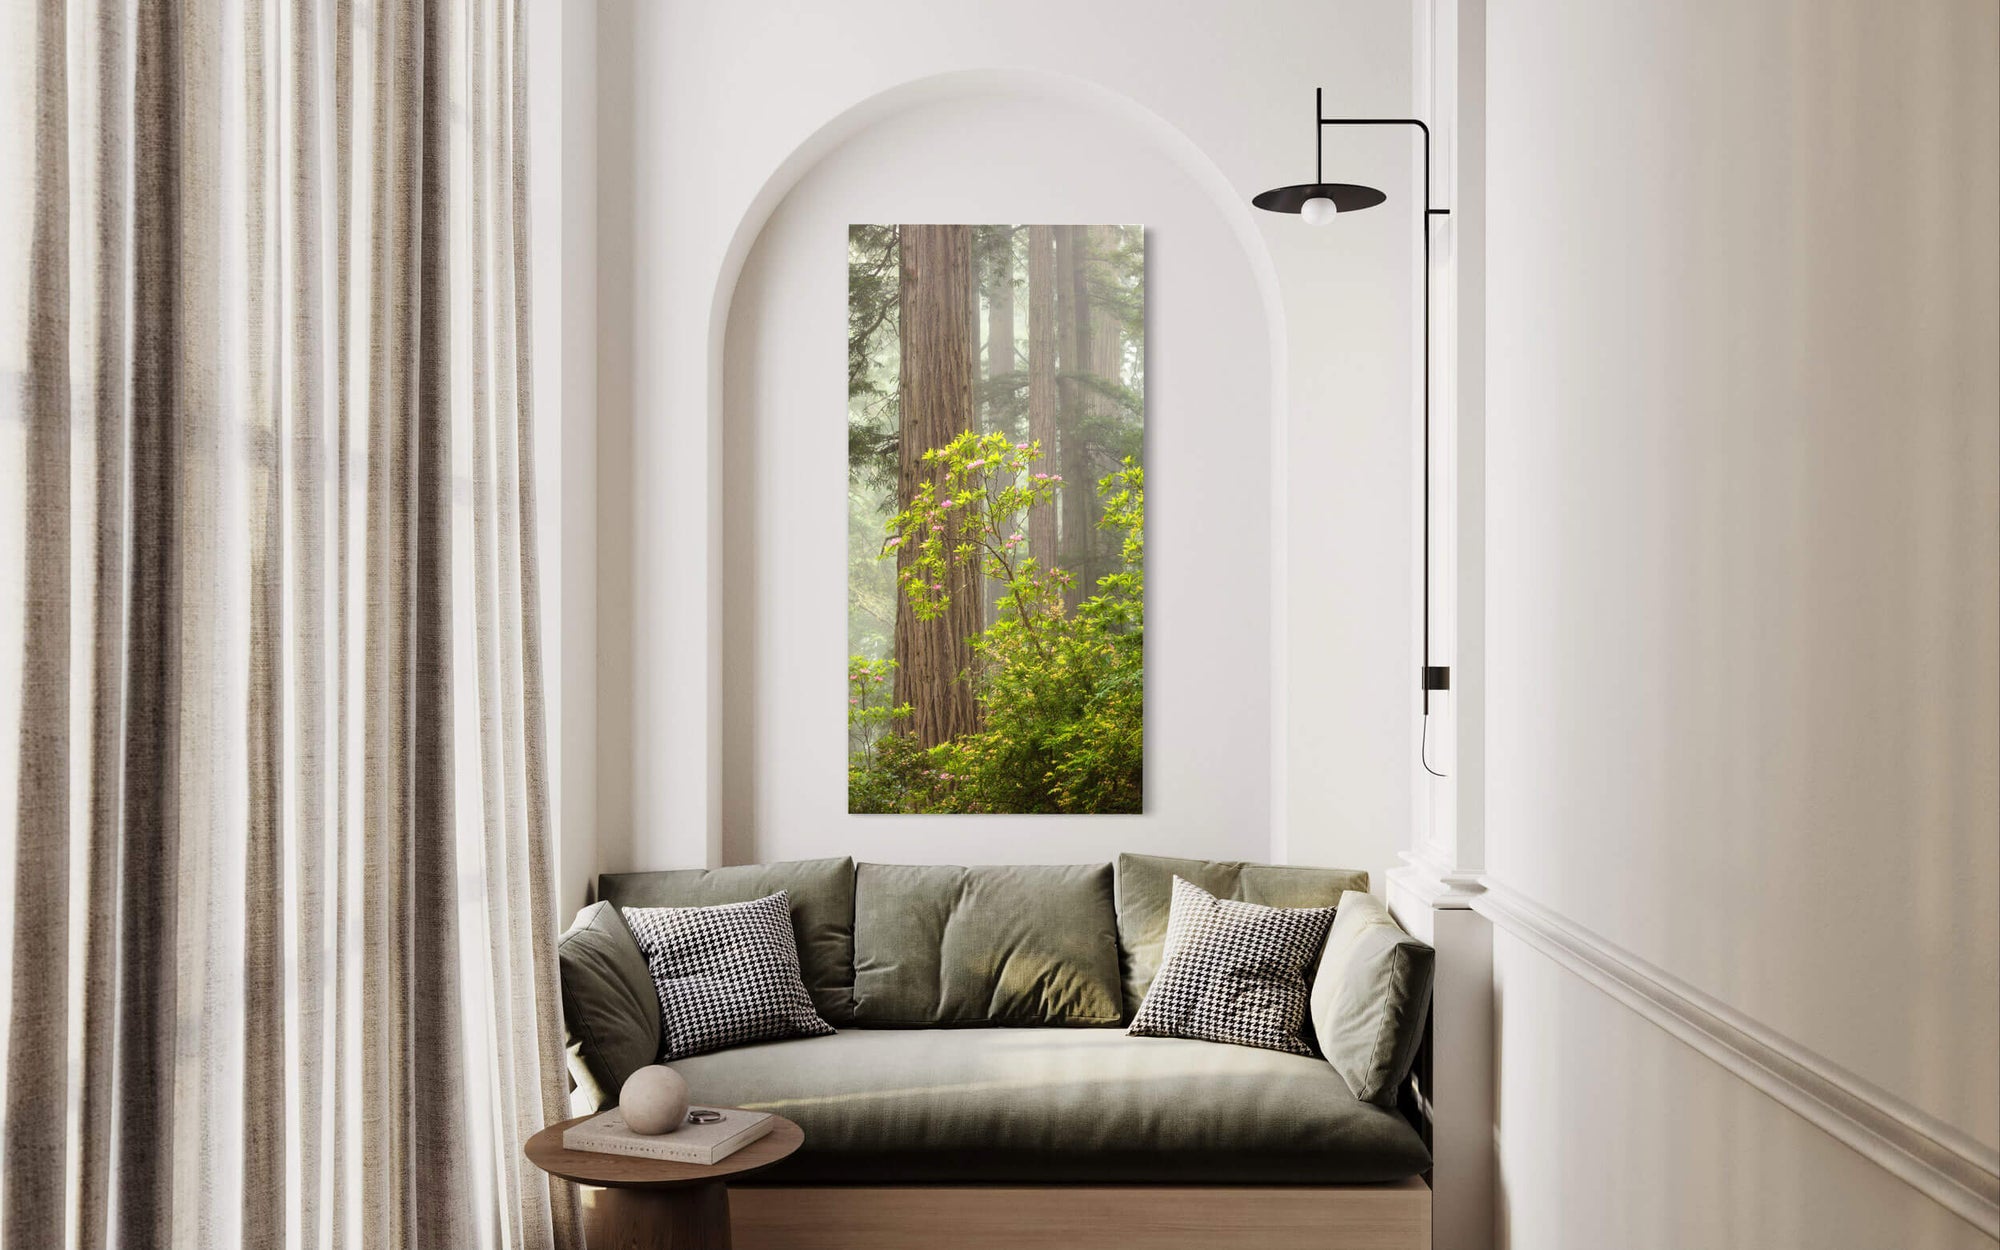 A California redwoods picture with rhododendron hangs in a living room.